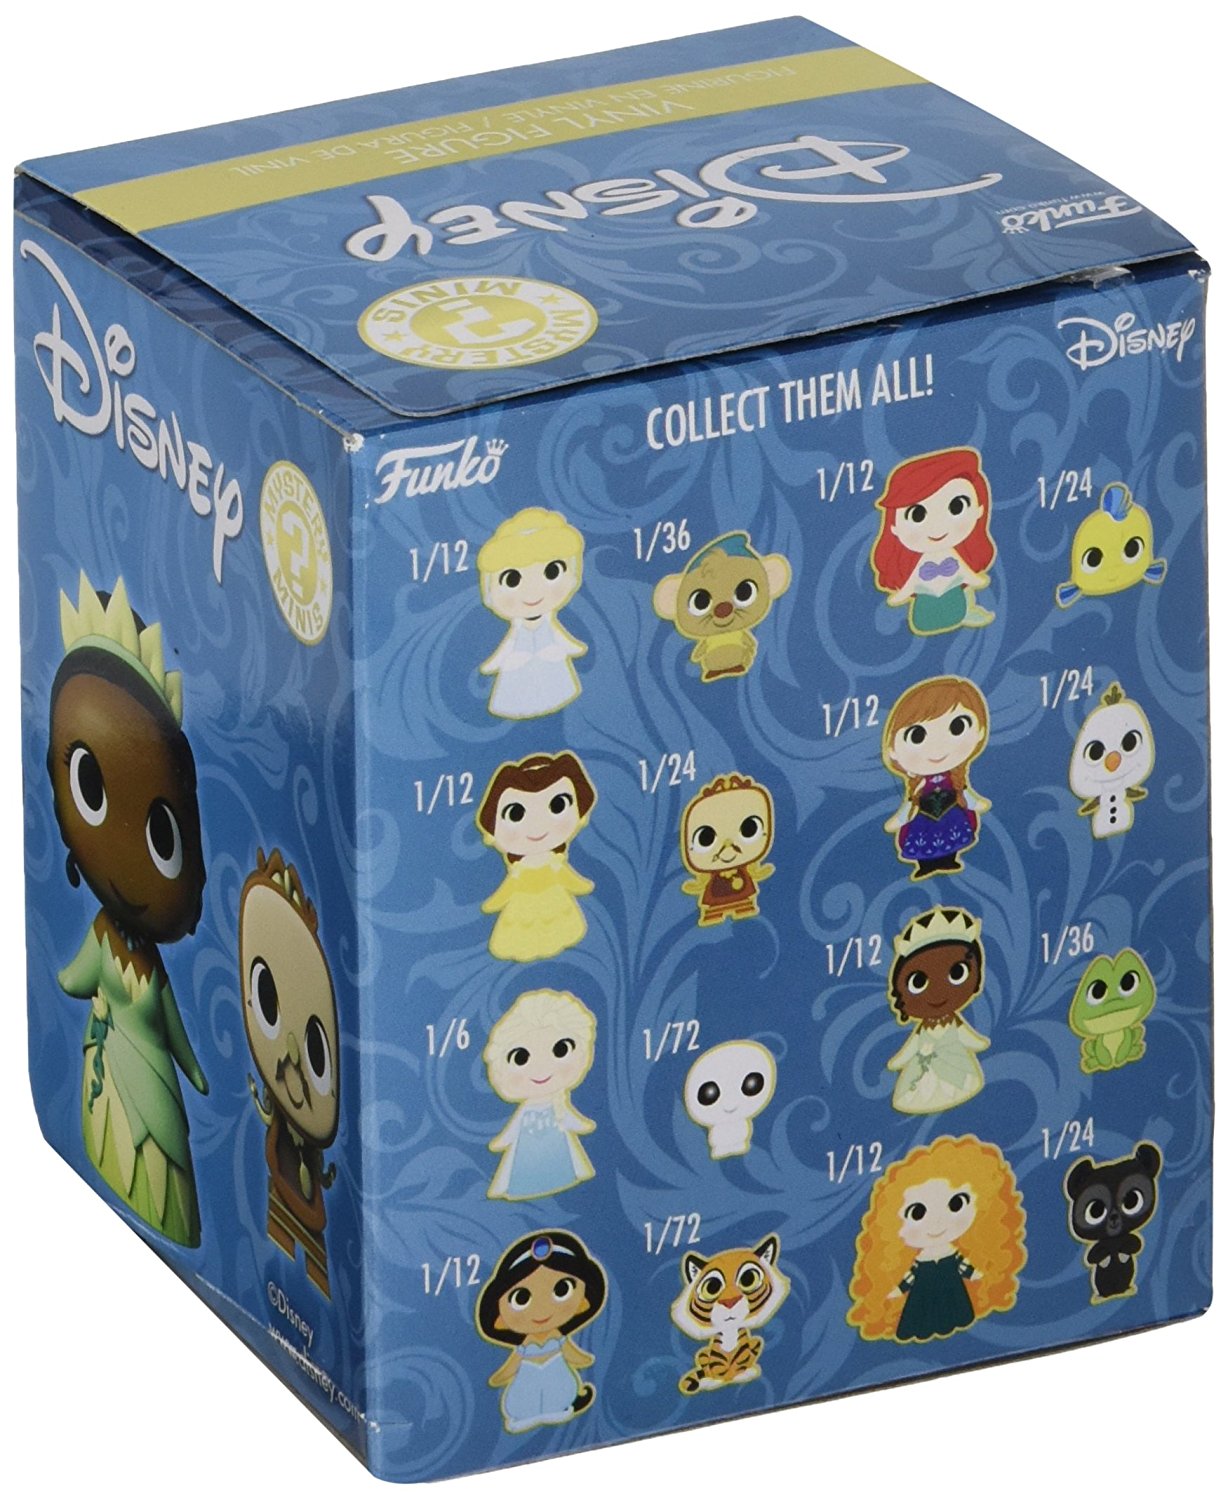 Disney Princess Mystery Mini Figure Display Box with 12 Figures Included